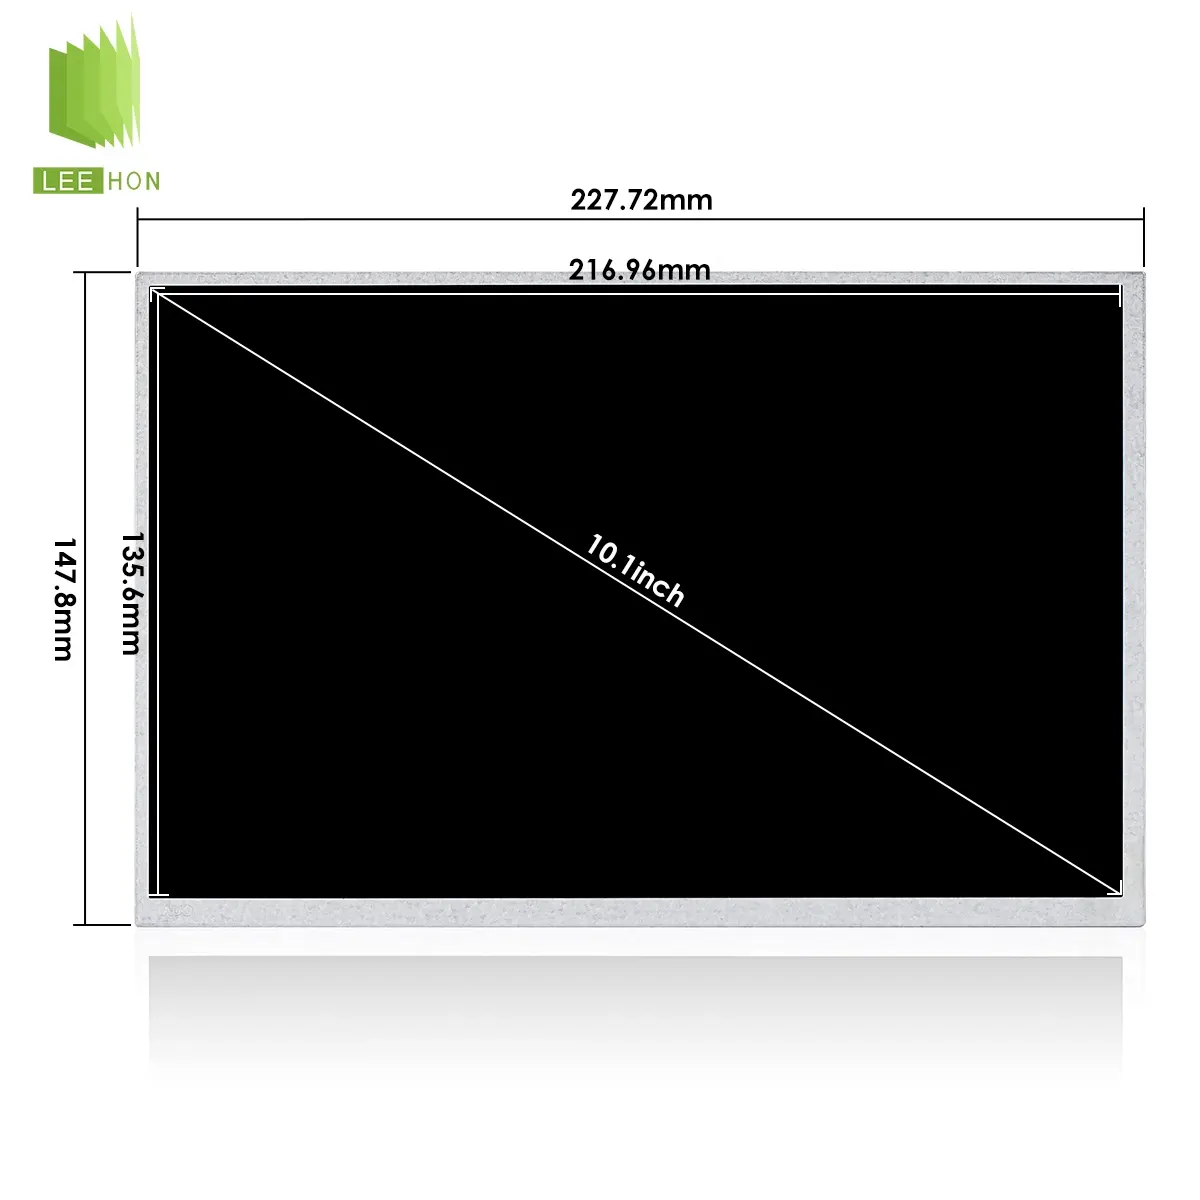 AUO Original 10.1 inch G101EAN02.1 1280x800 TFT IPS LCD Display Screen Full viewing angle 40pins LVDS LCD Panel